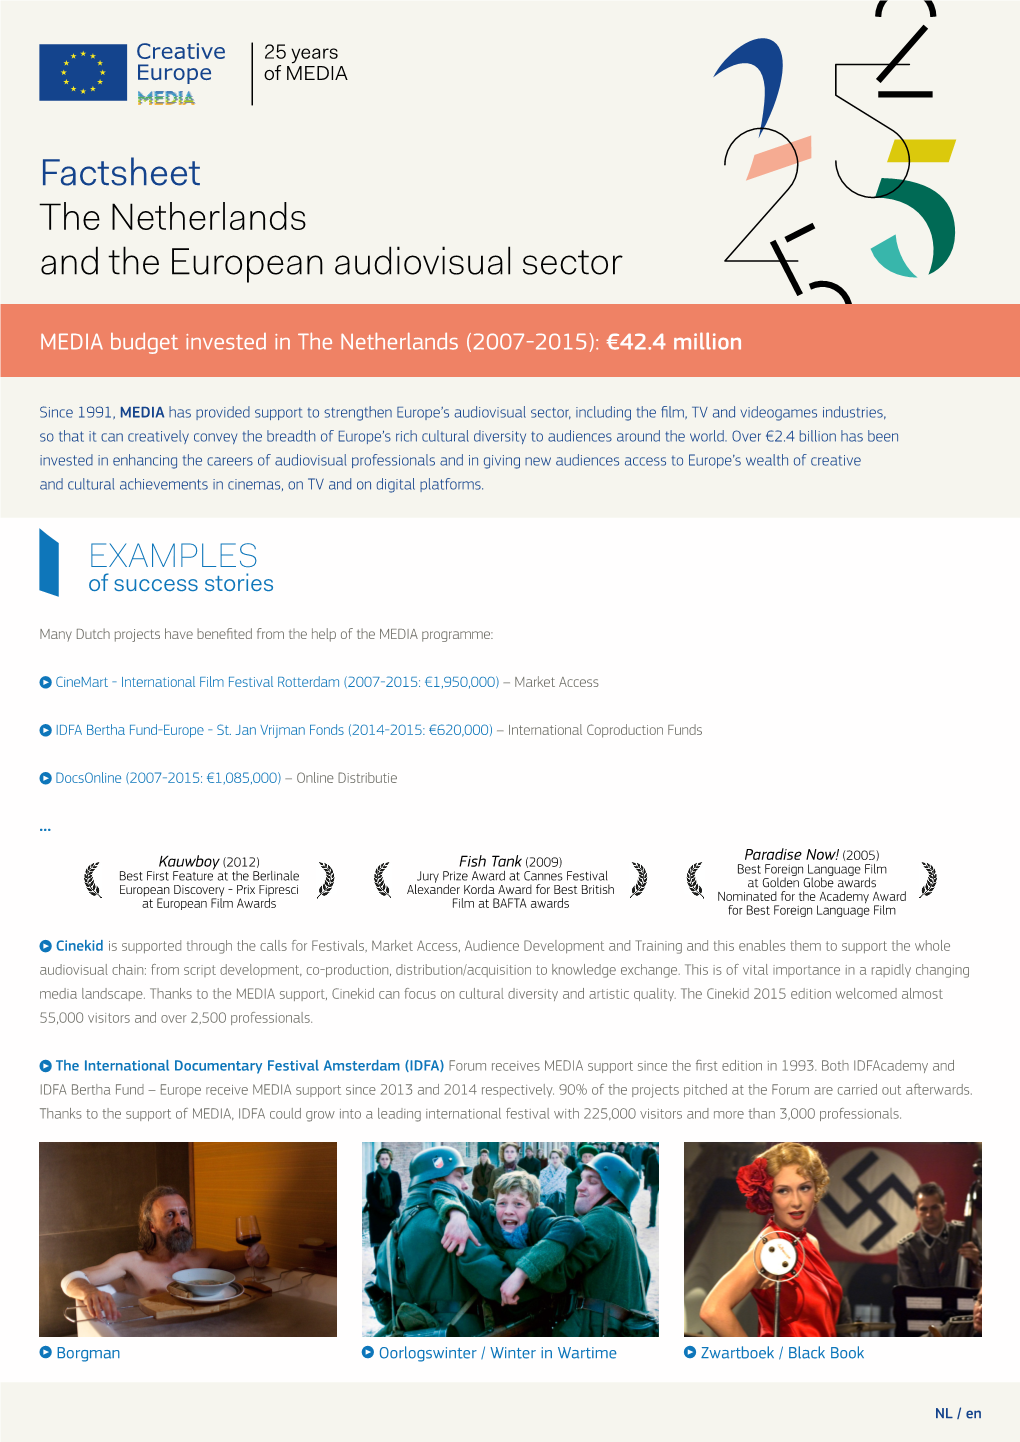 Factsheet the Netherlands and the European Audiovisual Sector